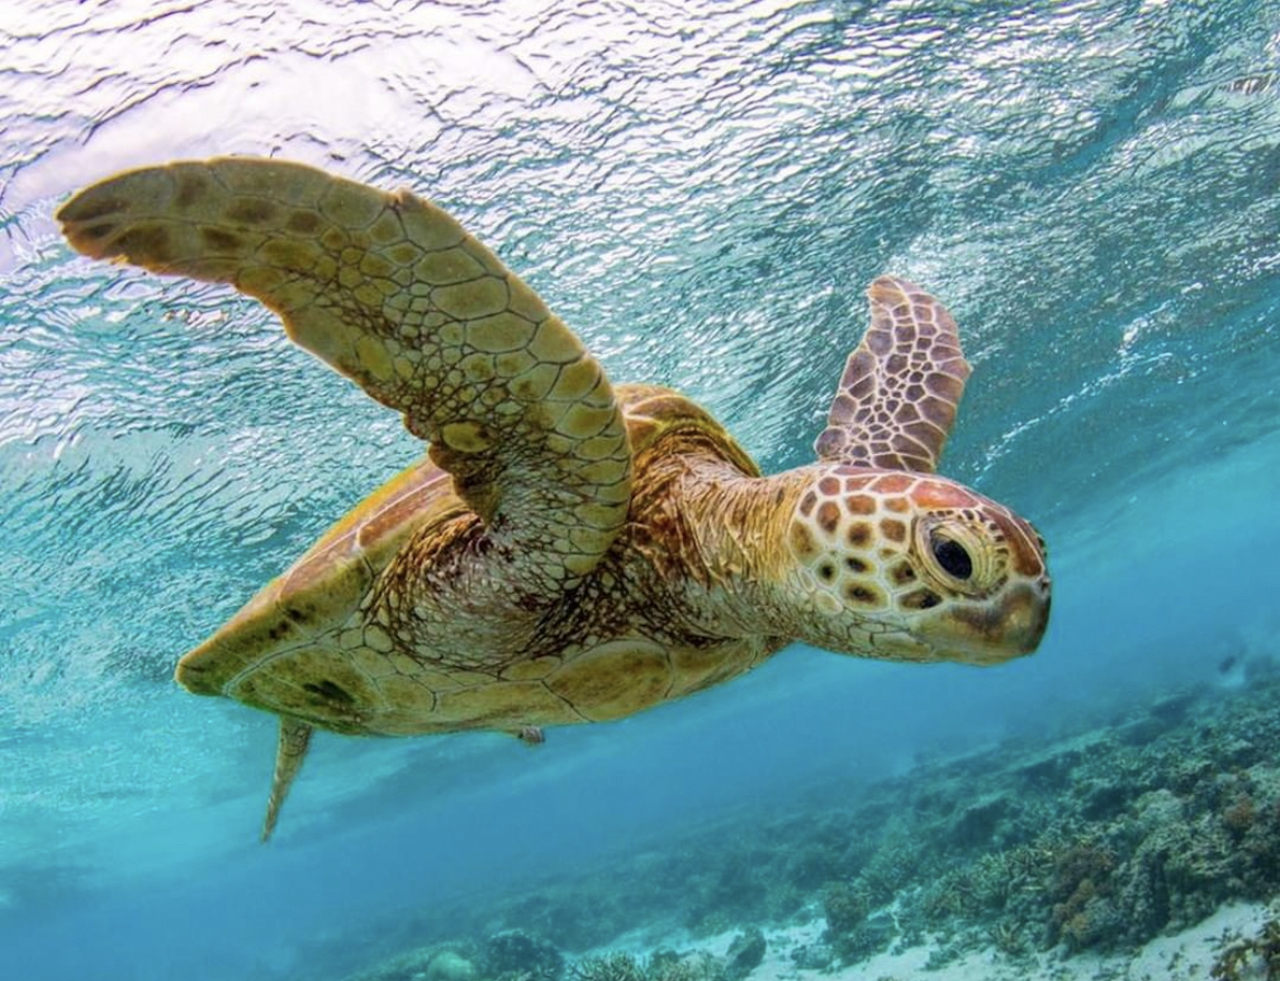 These Southern Great Barrier Reef Experiences Let You Swim With Baby Turtles & Cuddle Some Cows